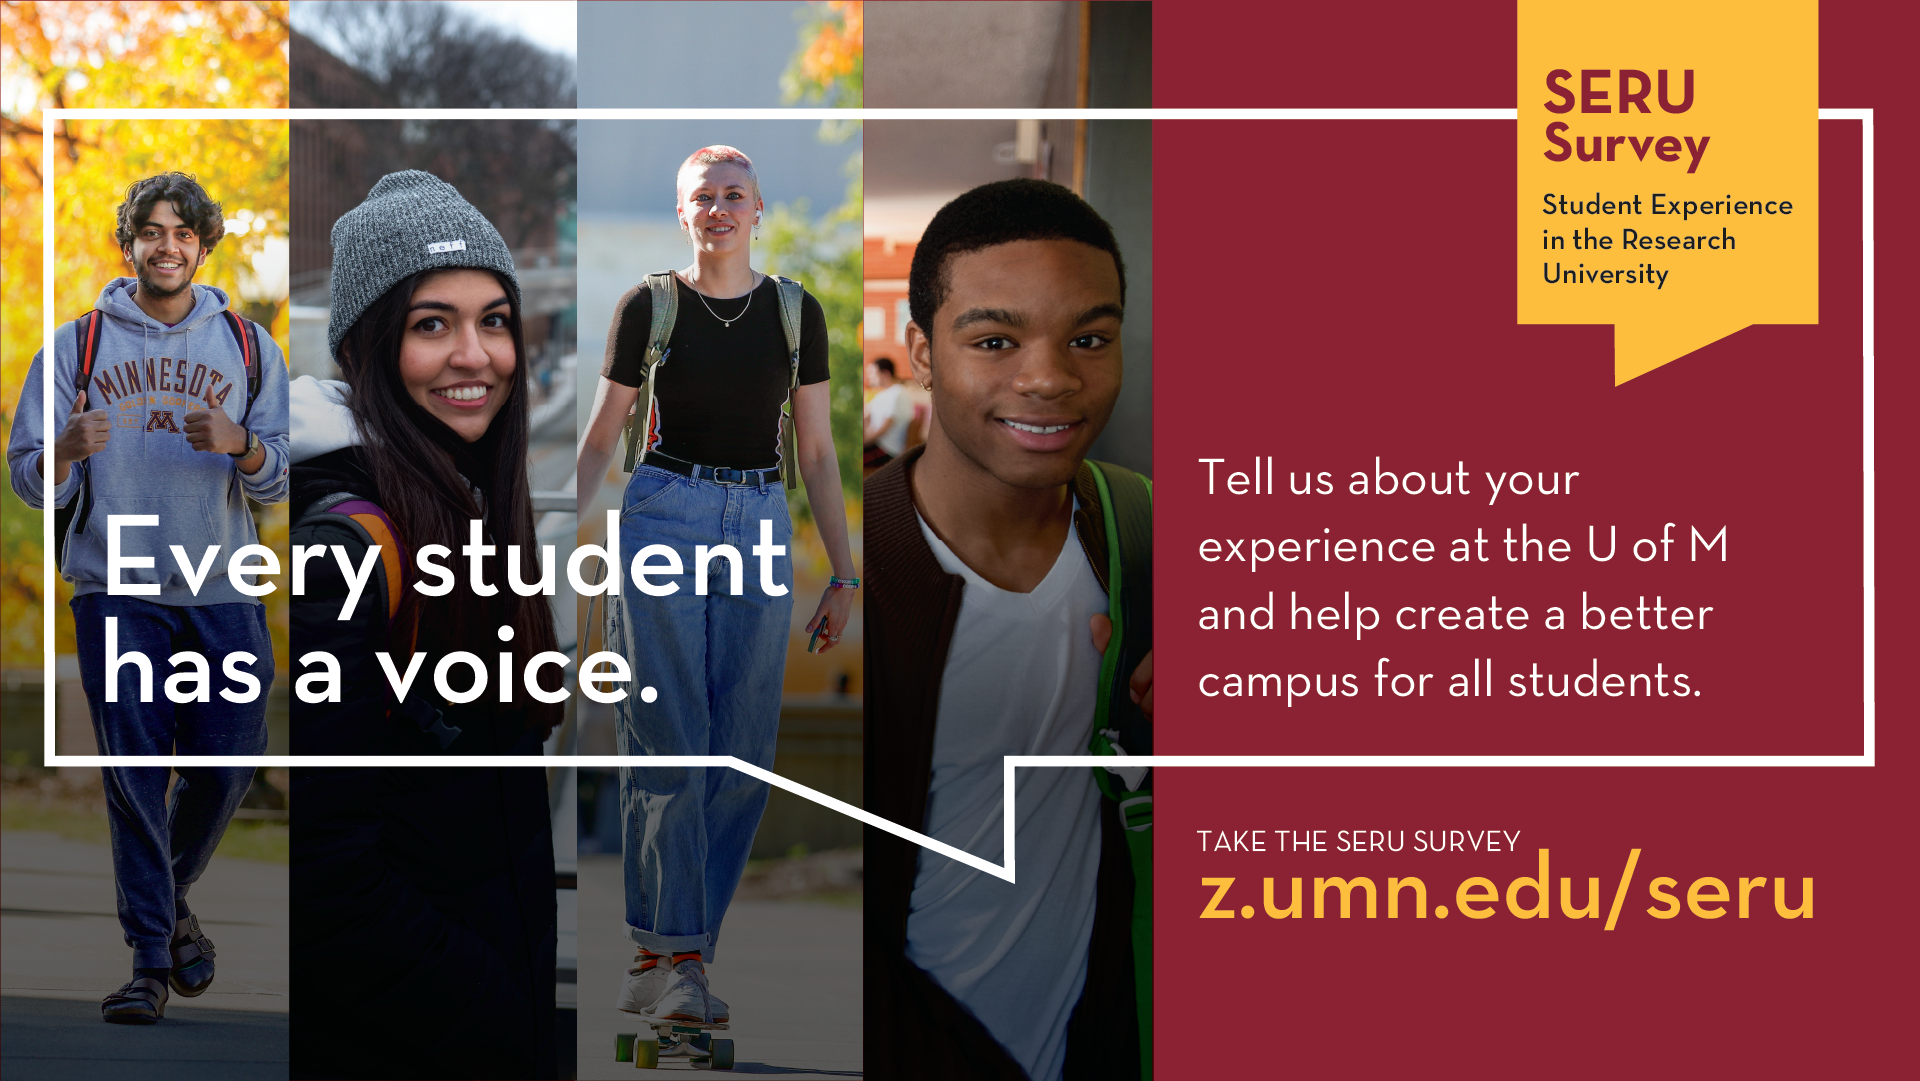 [TEXT]: SERU Survey, Tell us about your experience at the U of M and help create a better campus for all students. Take the survey: z.umn.edu/seru [IMAGE]: Four portraits of students looking at camera, graphic of word bubble with text.